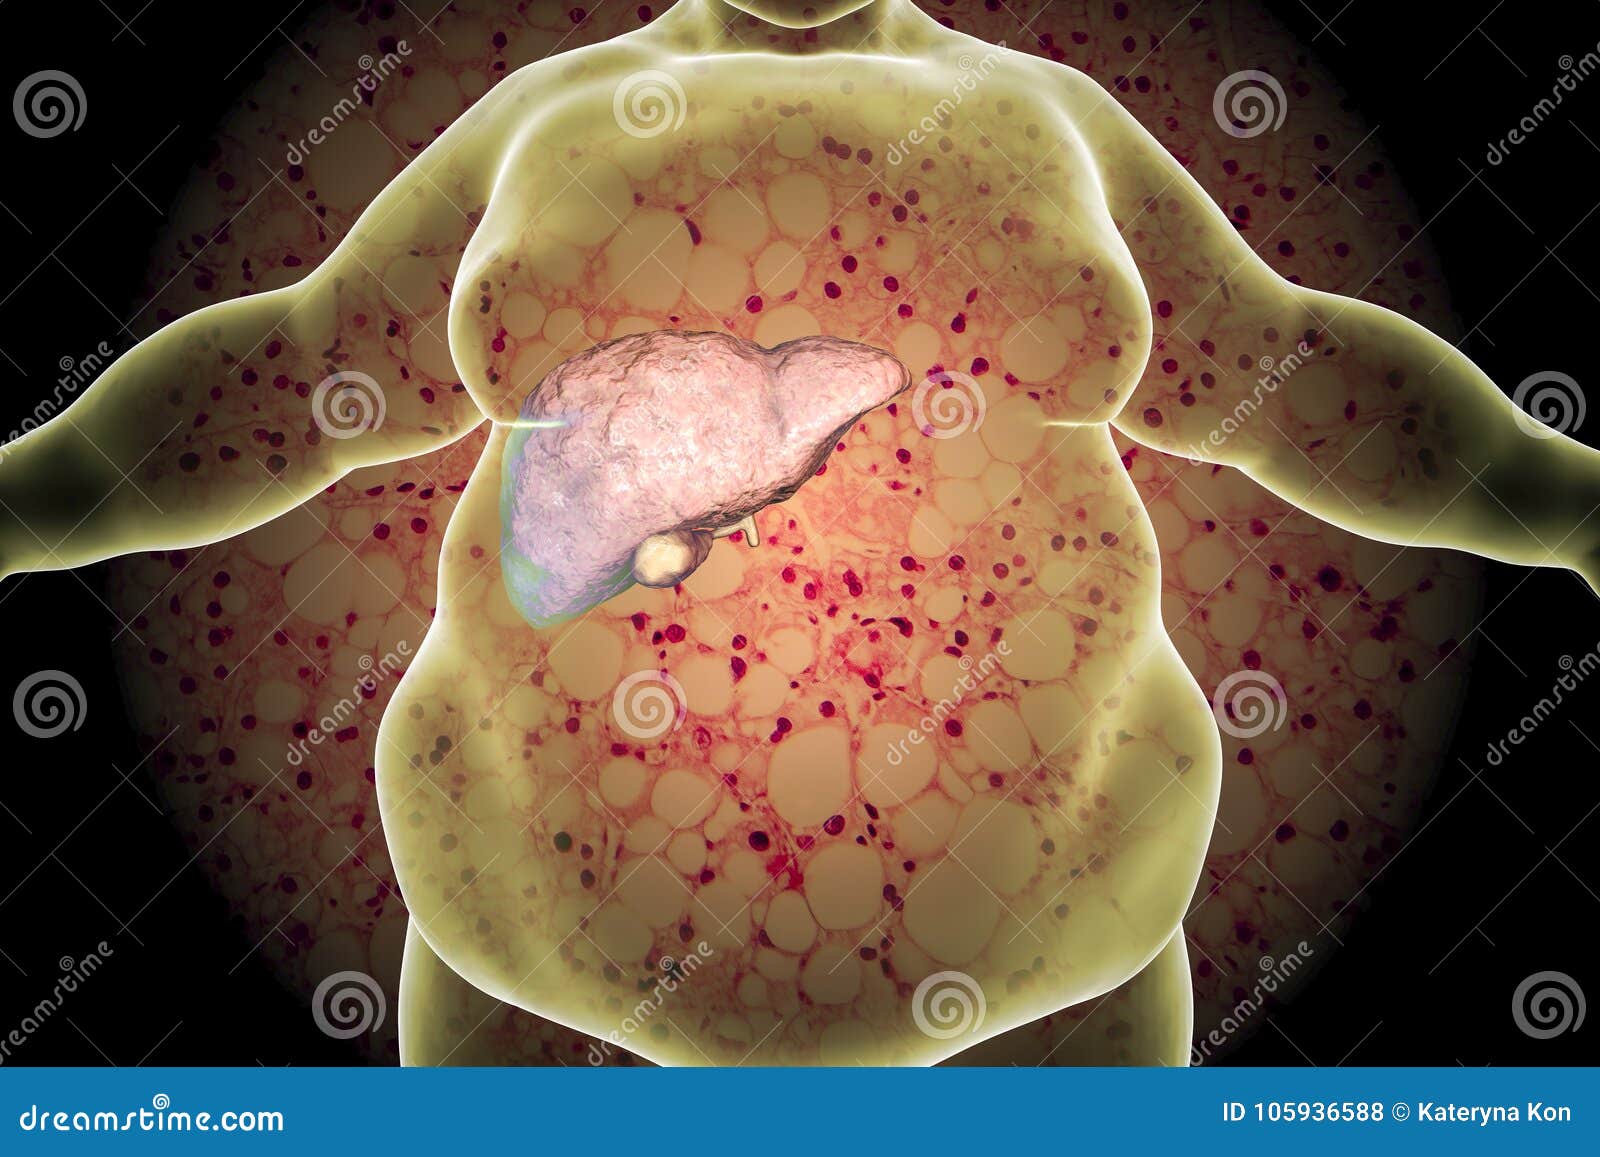 obese man with fatty liver